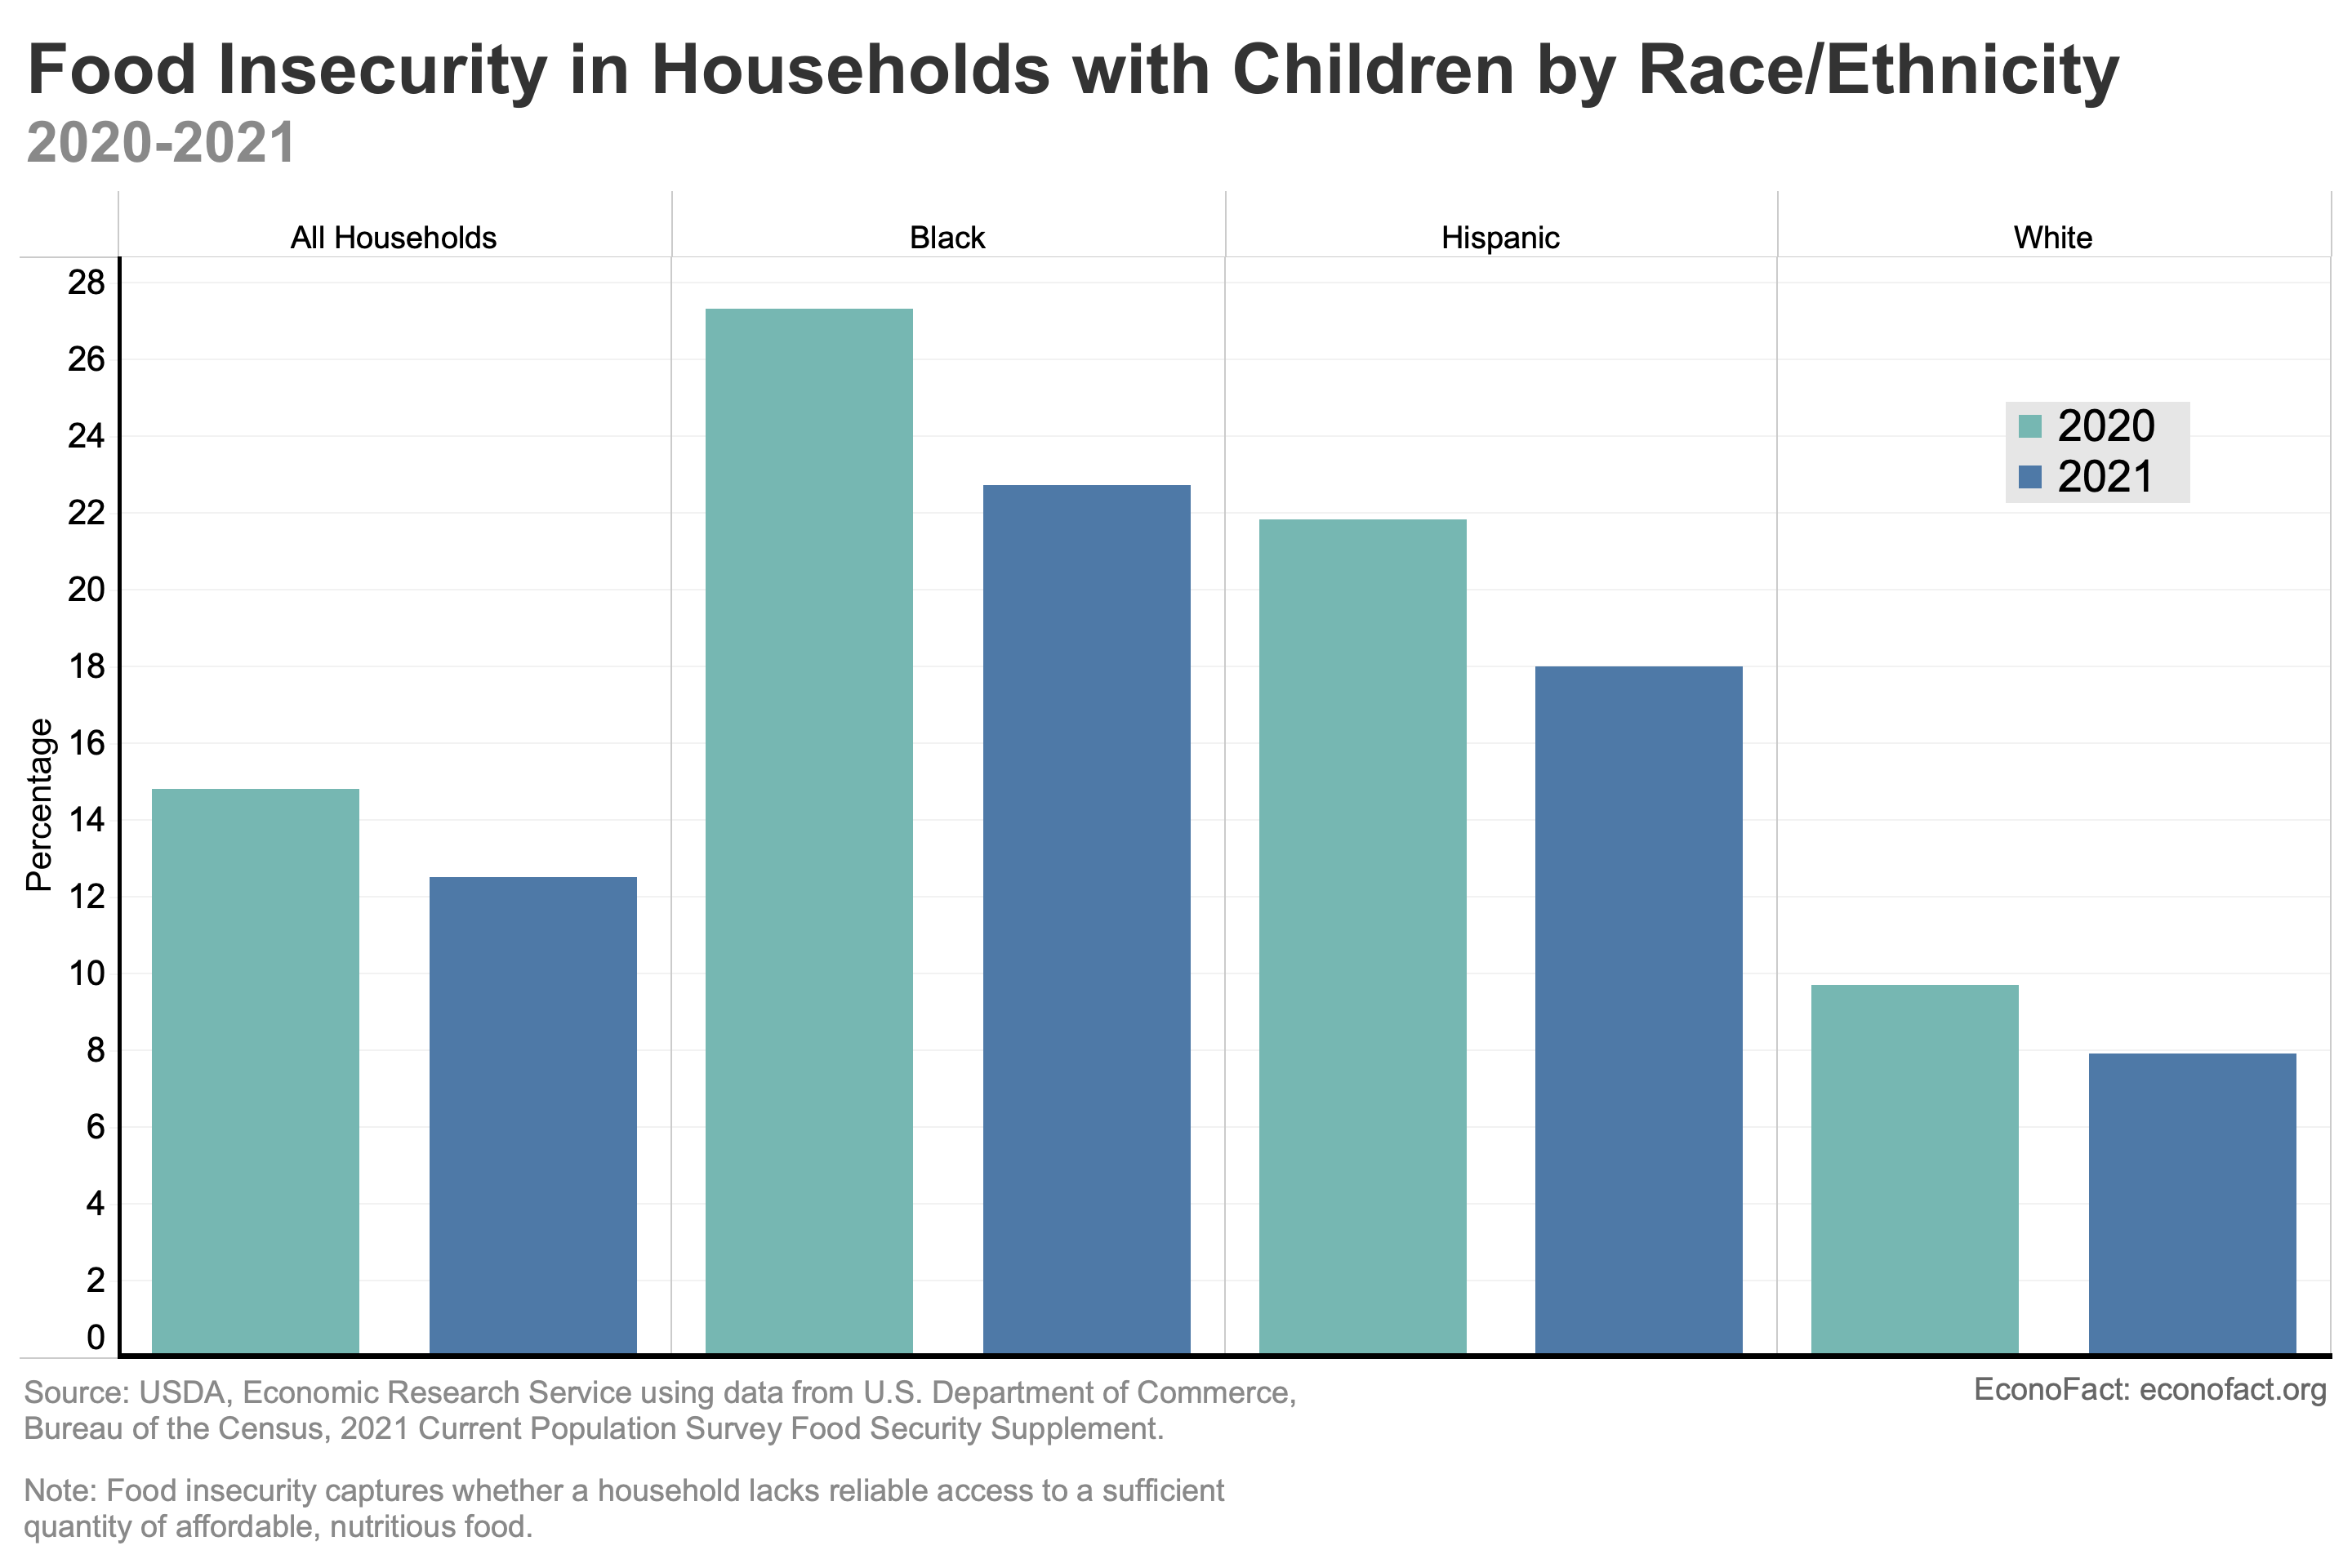 Bar chart shows that food insecurity declined for U.S. households with children from 14.8 percent of households with children in 2020 to 12.5 percent in 2021. White, Black, and Hispanic households with children saw about a 16% drop in food insecurity.